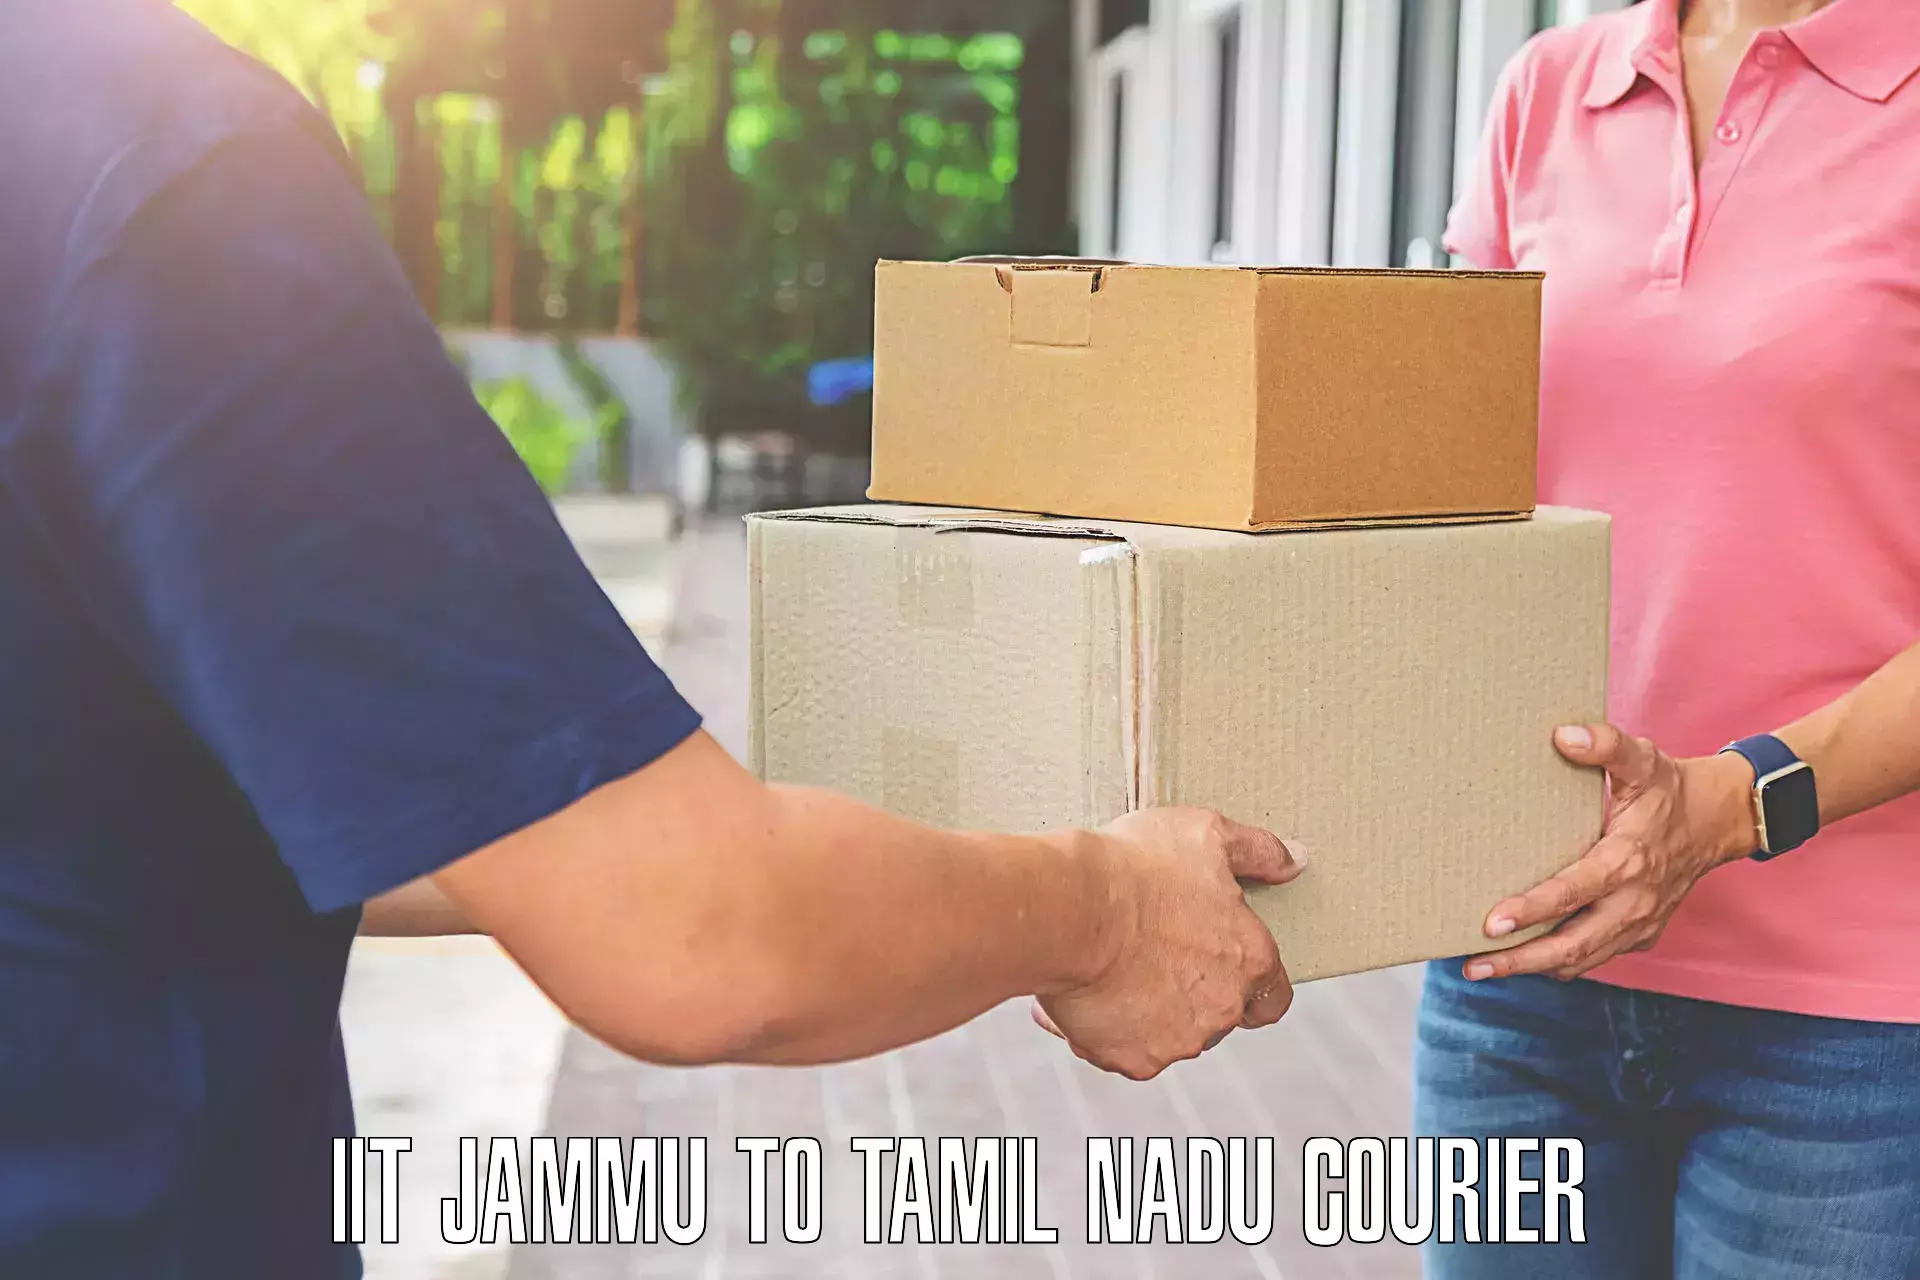 Luggage transport consulting in IIT Jammu to Tamil Nadu